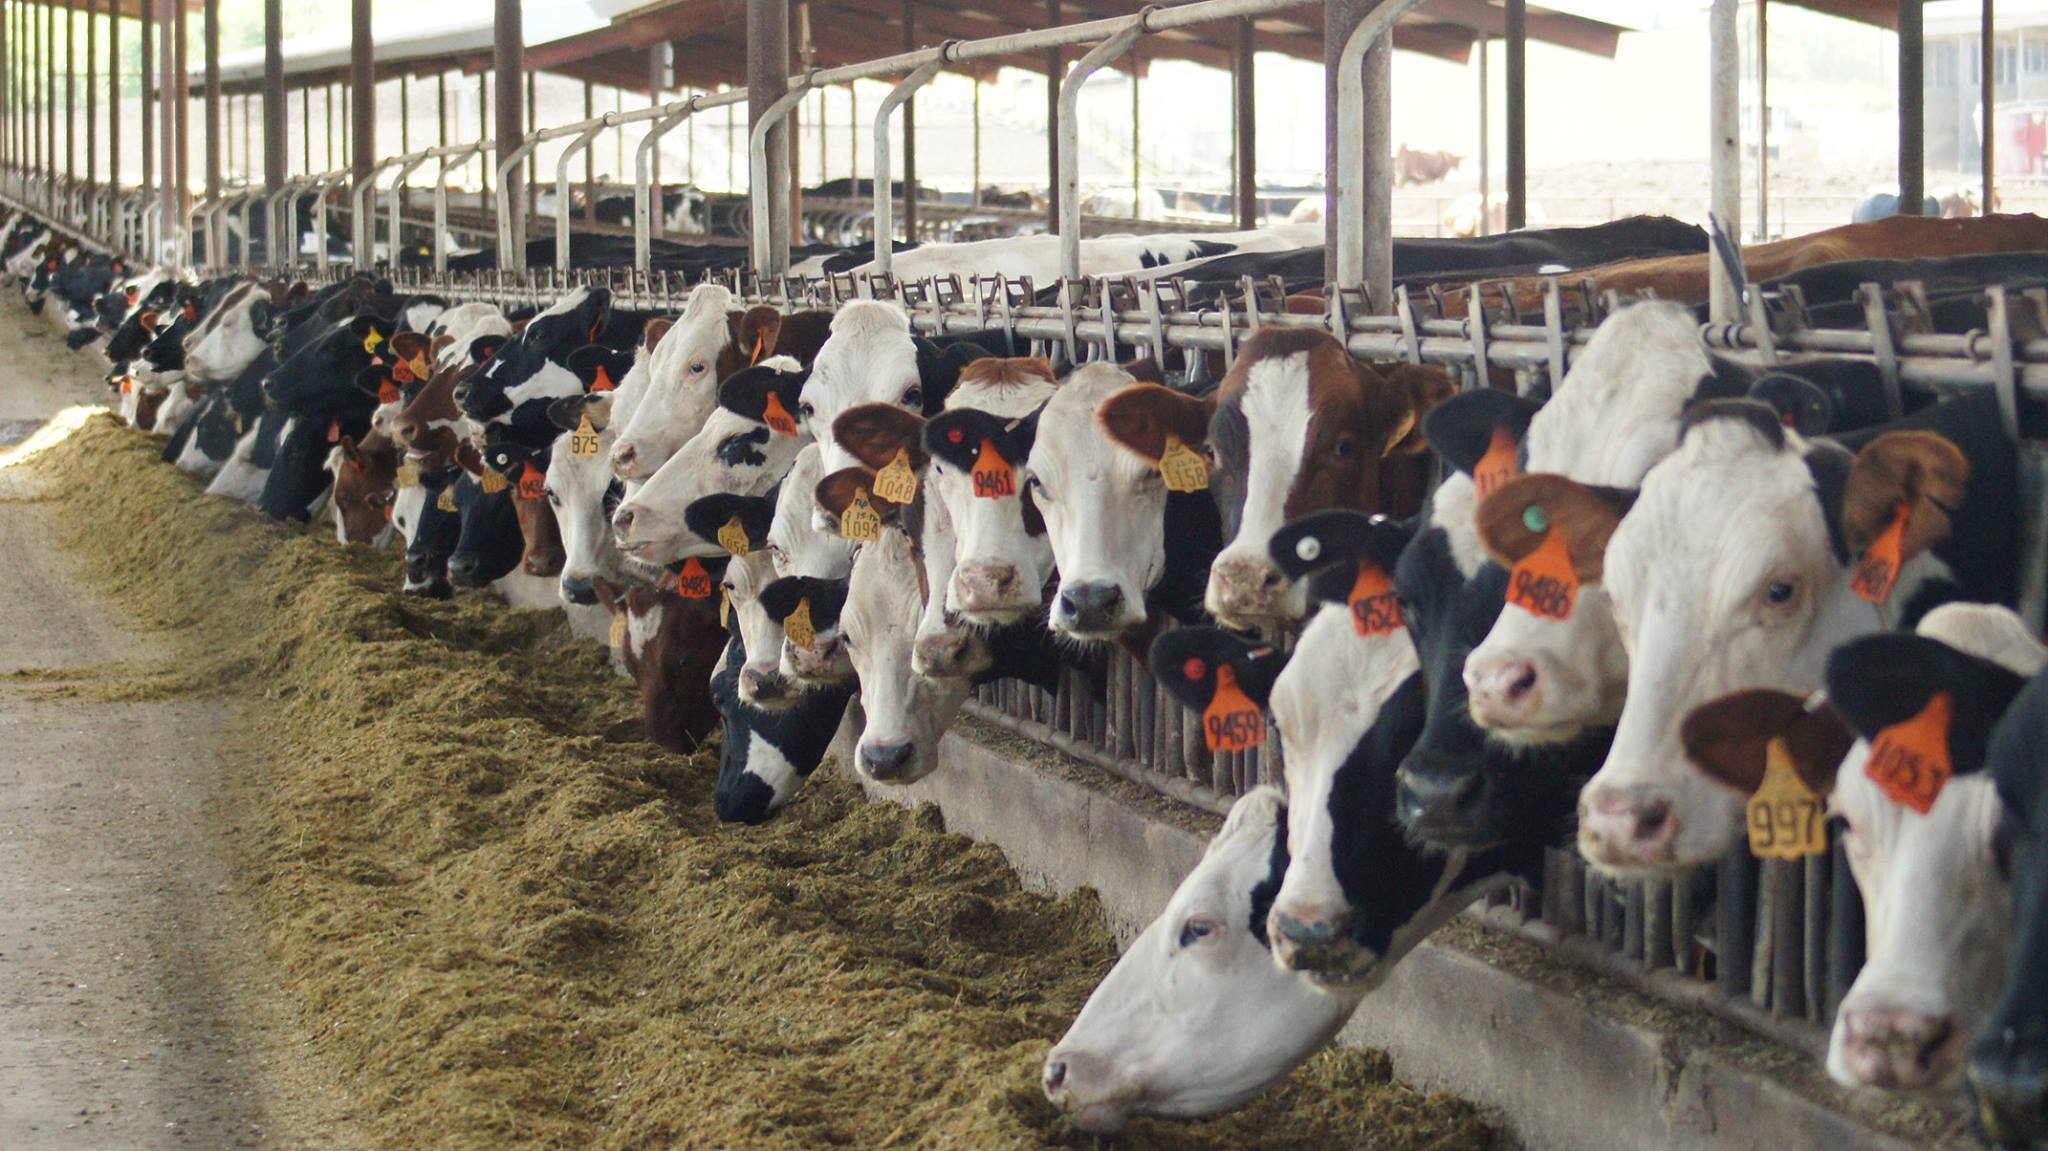 Some 3550 cattle were involved in the 10-year trial to find out the benefits of heterosis in dairy cattle 